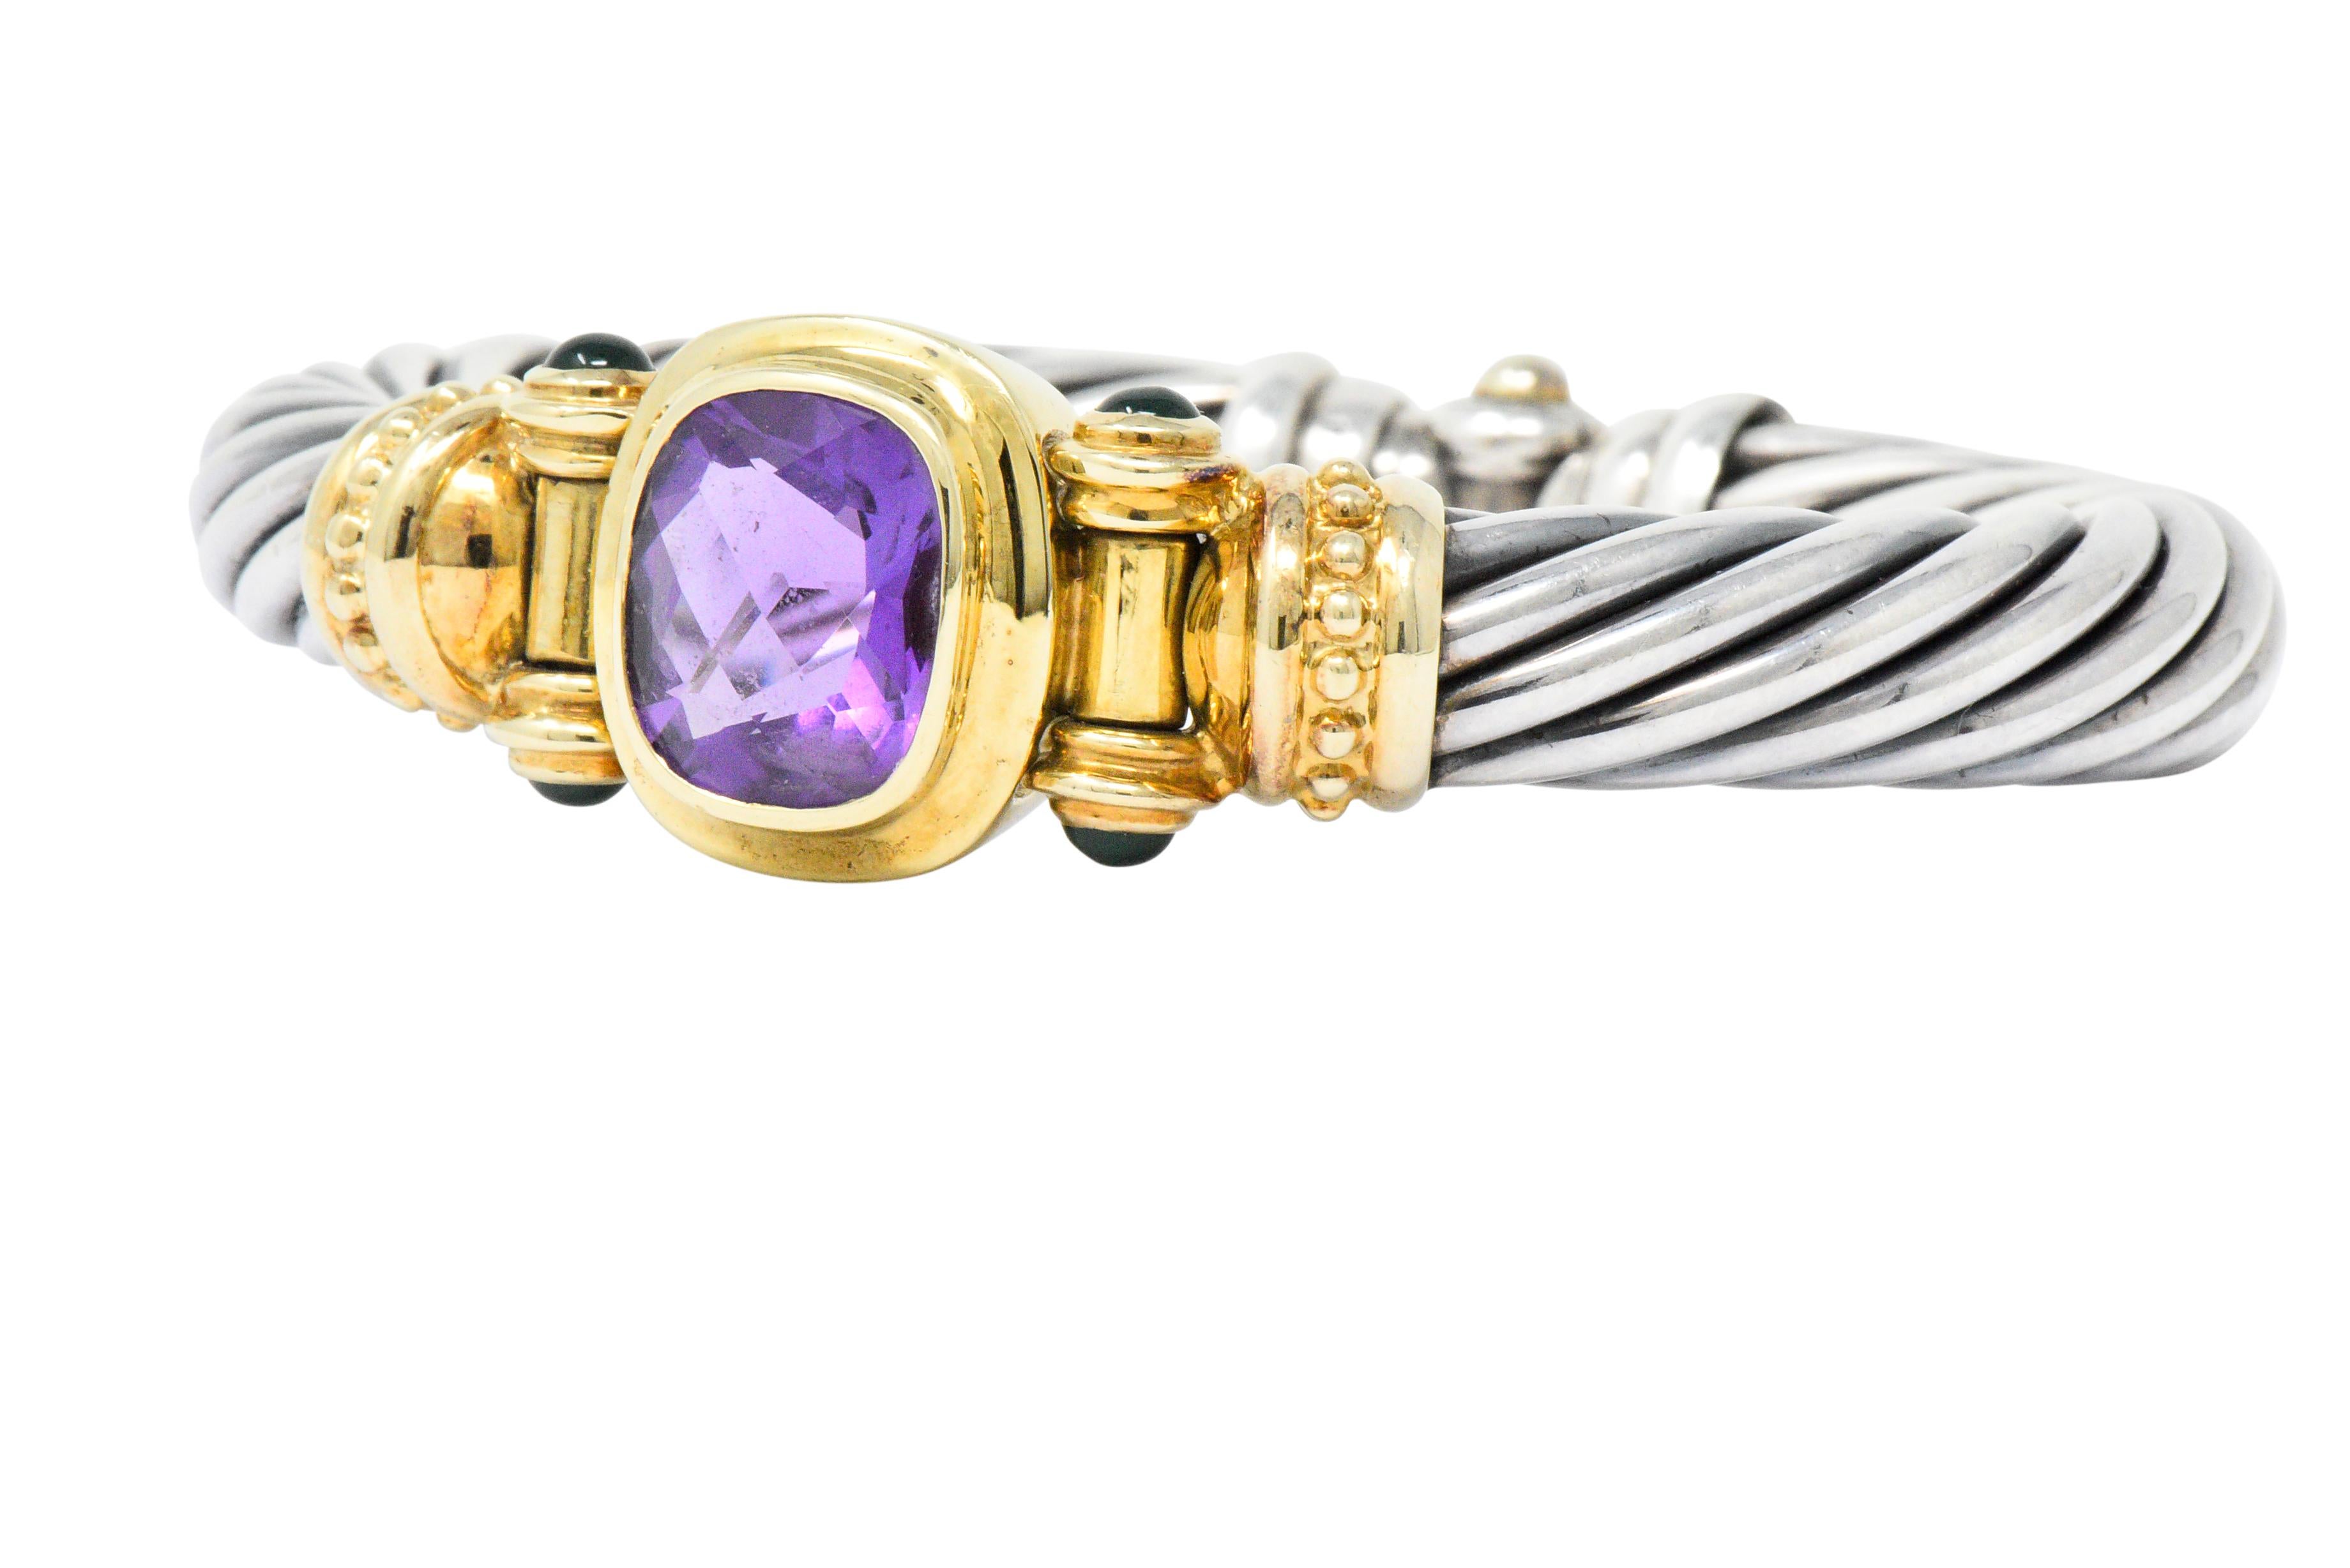 Bangle cuff style bracelet comprised of the classic twisted cable motif in silver

Centering a checkerboard cushion cut amethyst that measures approximately 15.5 x 13.5 mm; transparent and richly purple in color

Bezel set in gold and flanked by